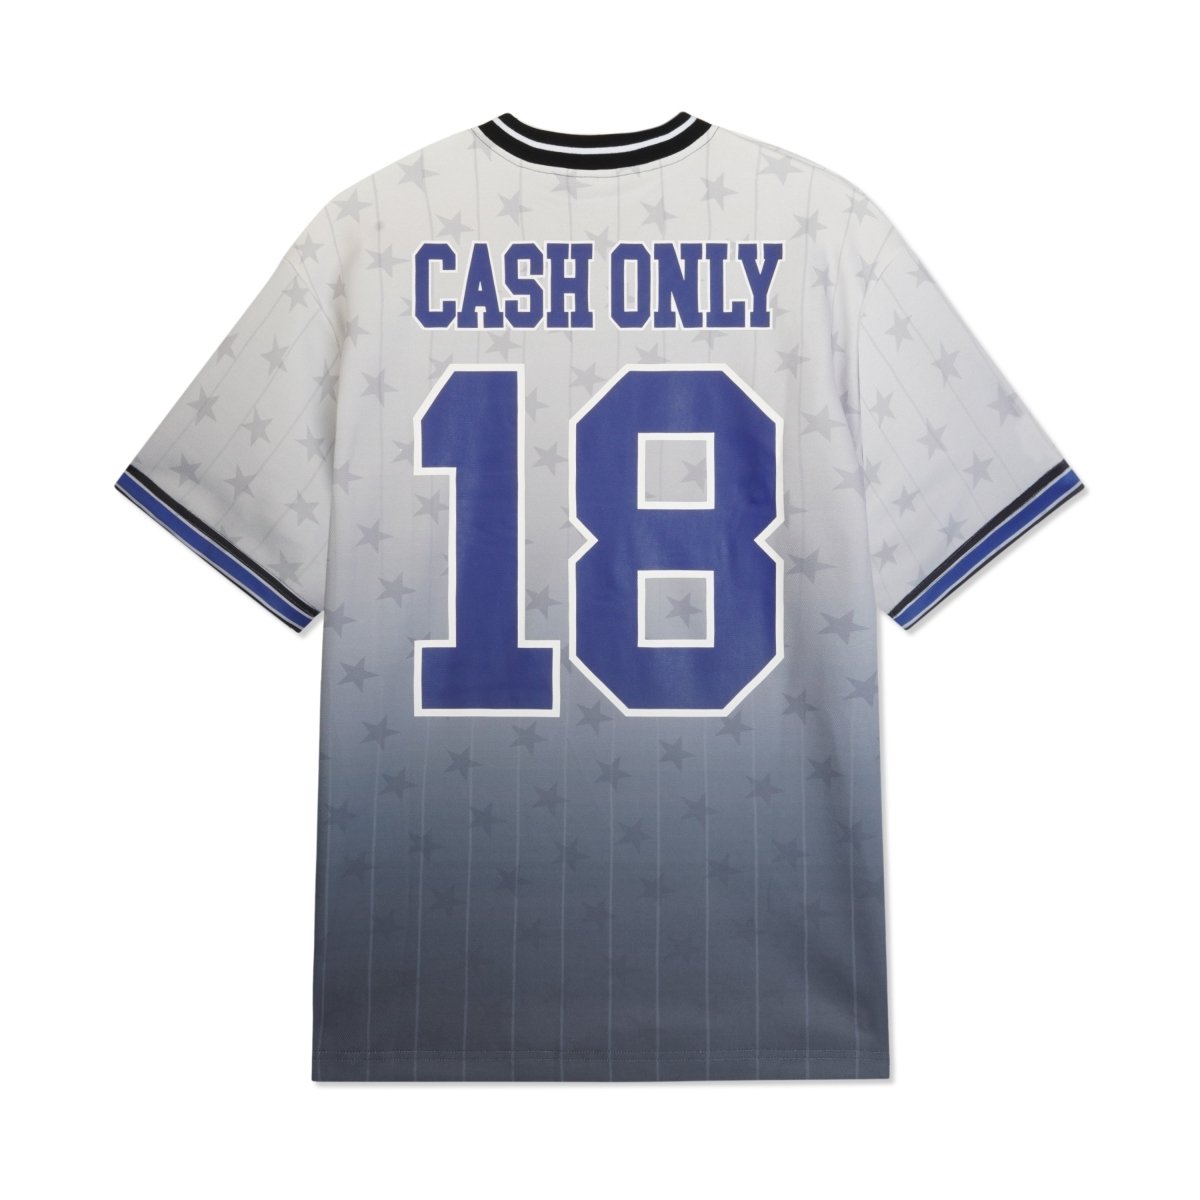 Cash Only Downtown Jersey in Grey - Goodnews Skateshop